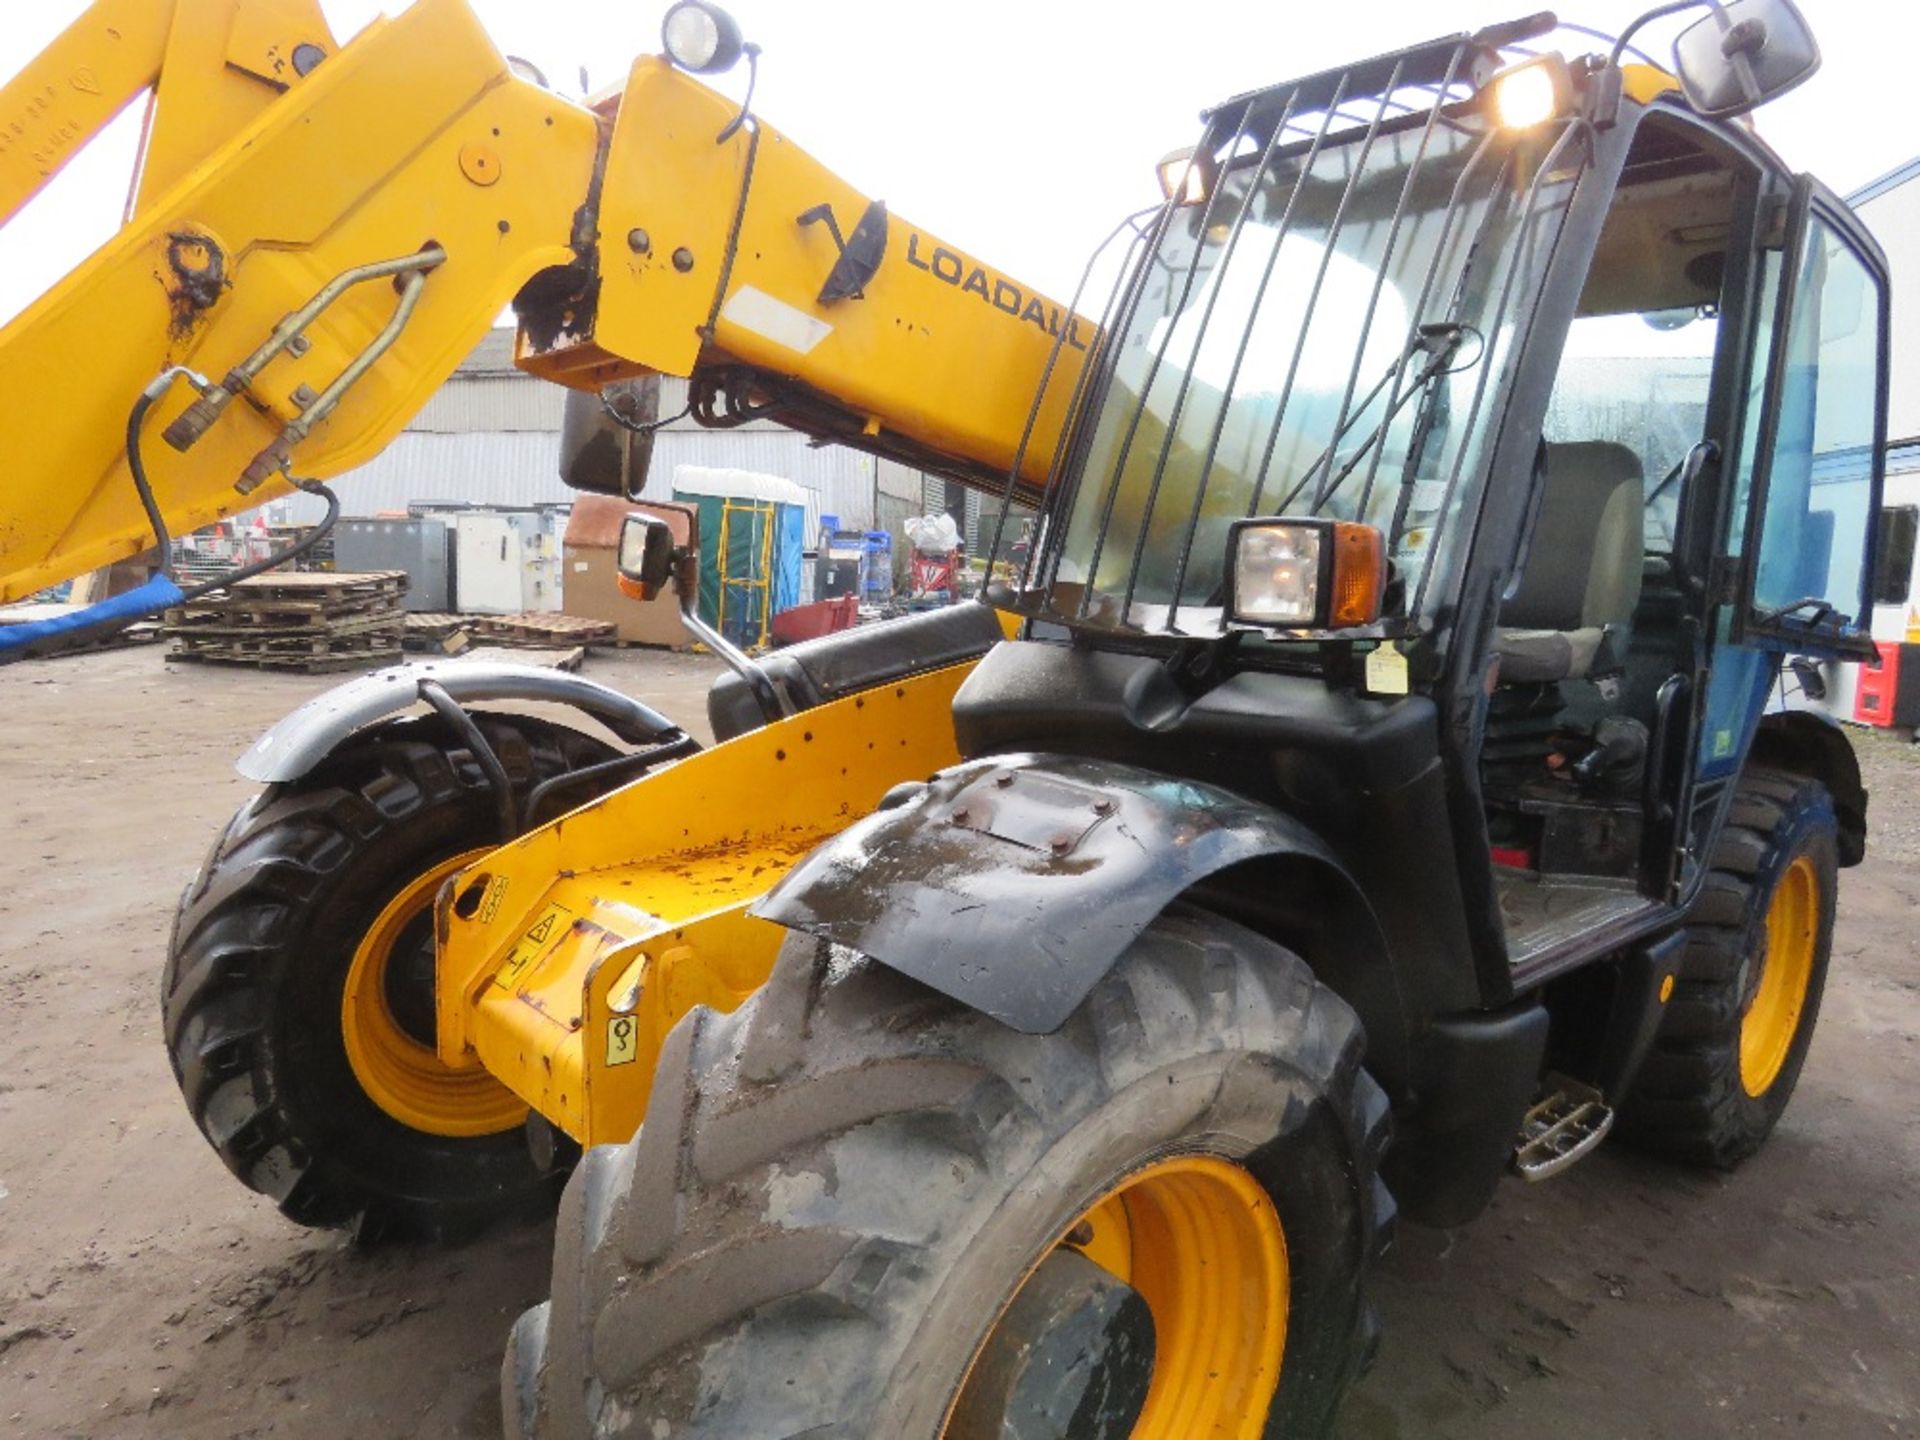 JCB 531-70 TELEHANDLER YEAR 20O7 BUILD, TURBO ENGINE. REG:NK07 HTA WITH V5. ONE PREVIOUS REC KEEPER - Image 16 of 17